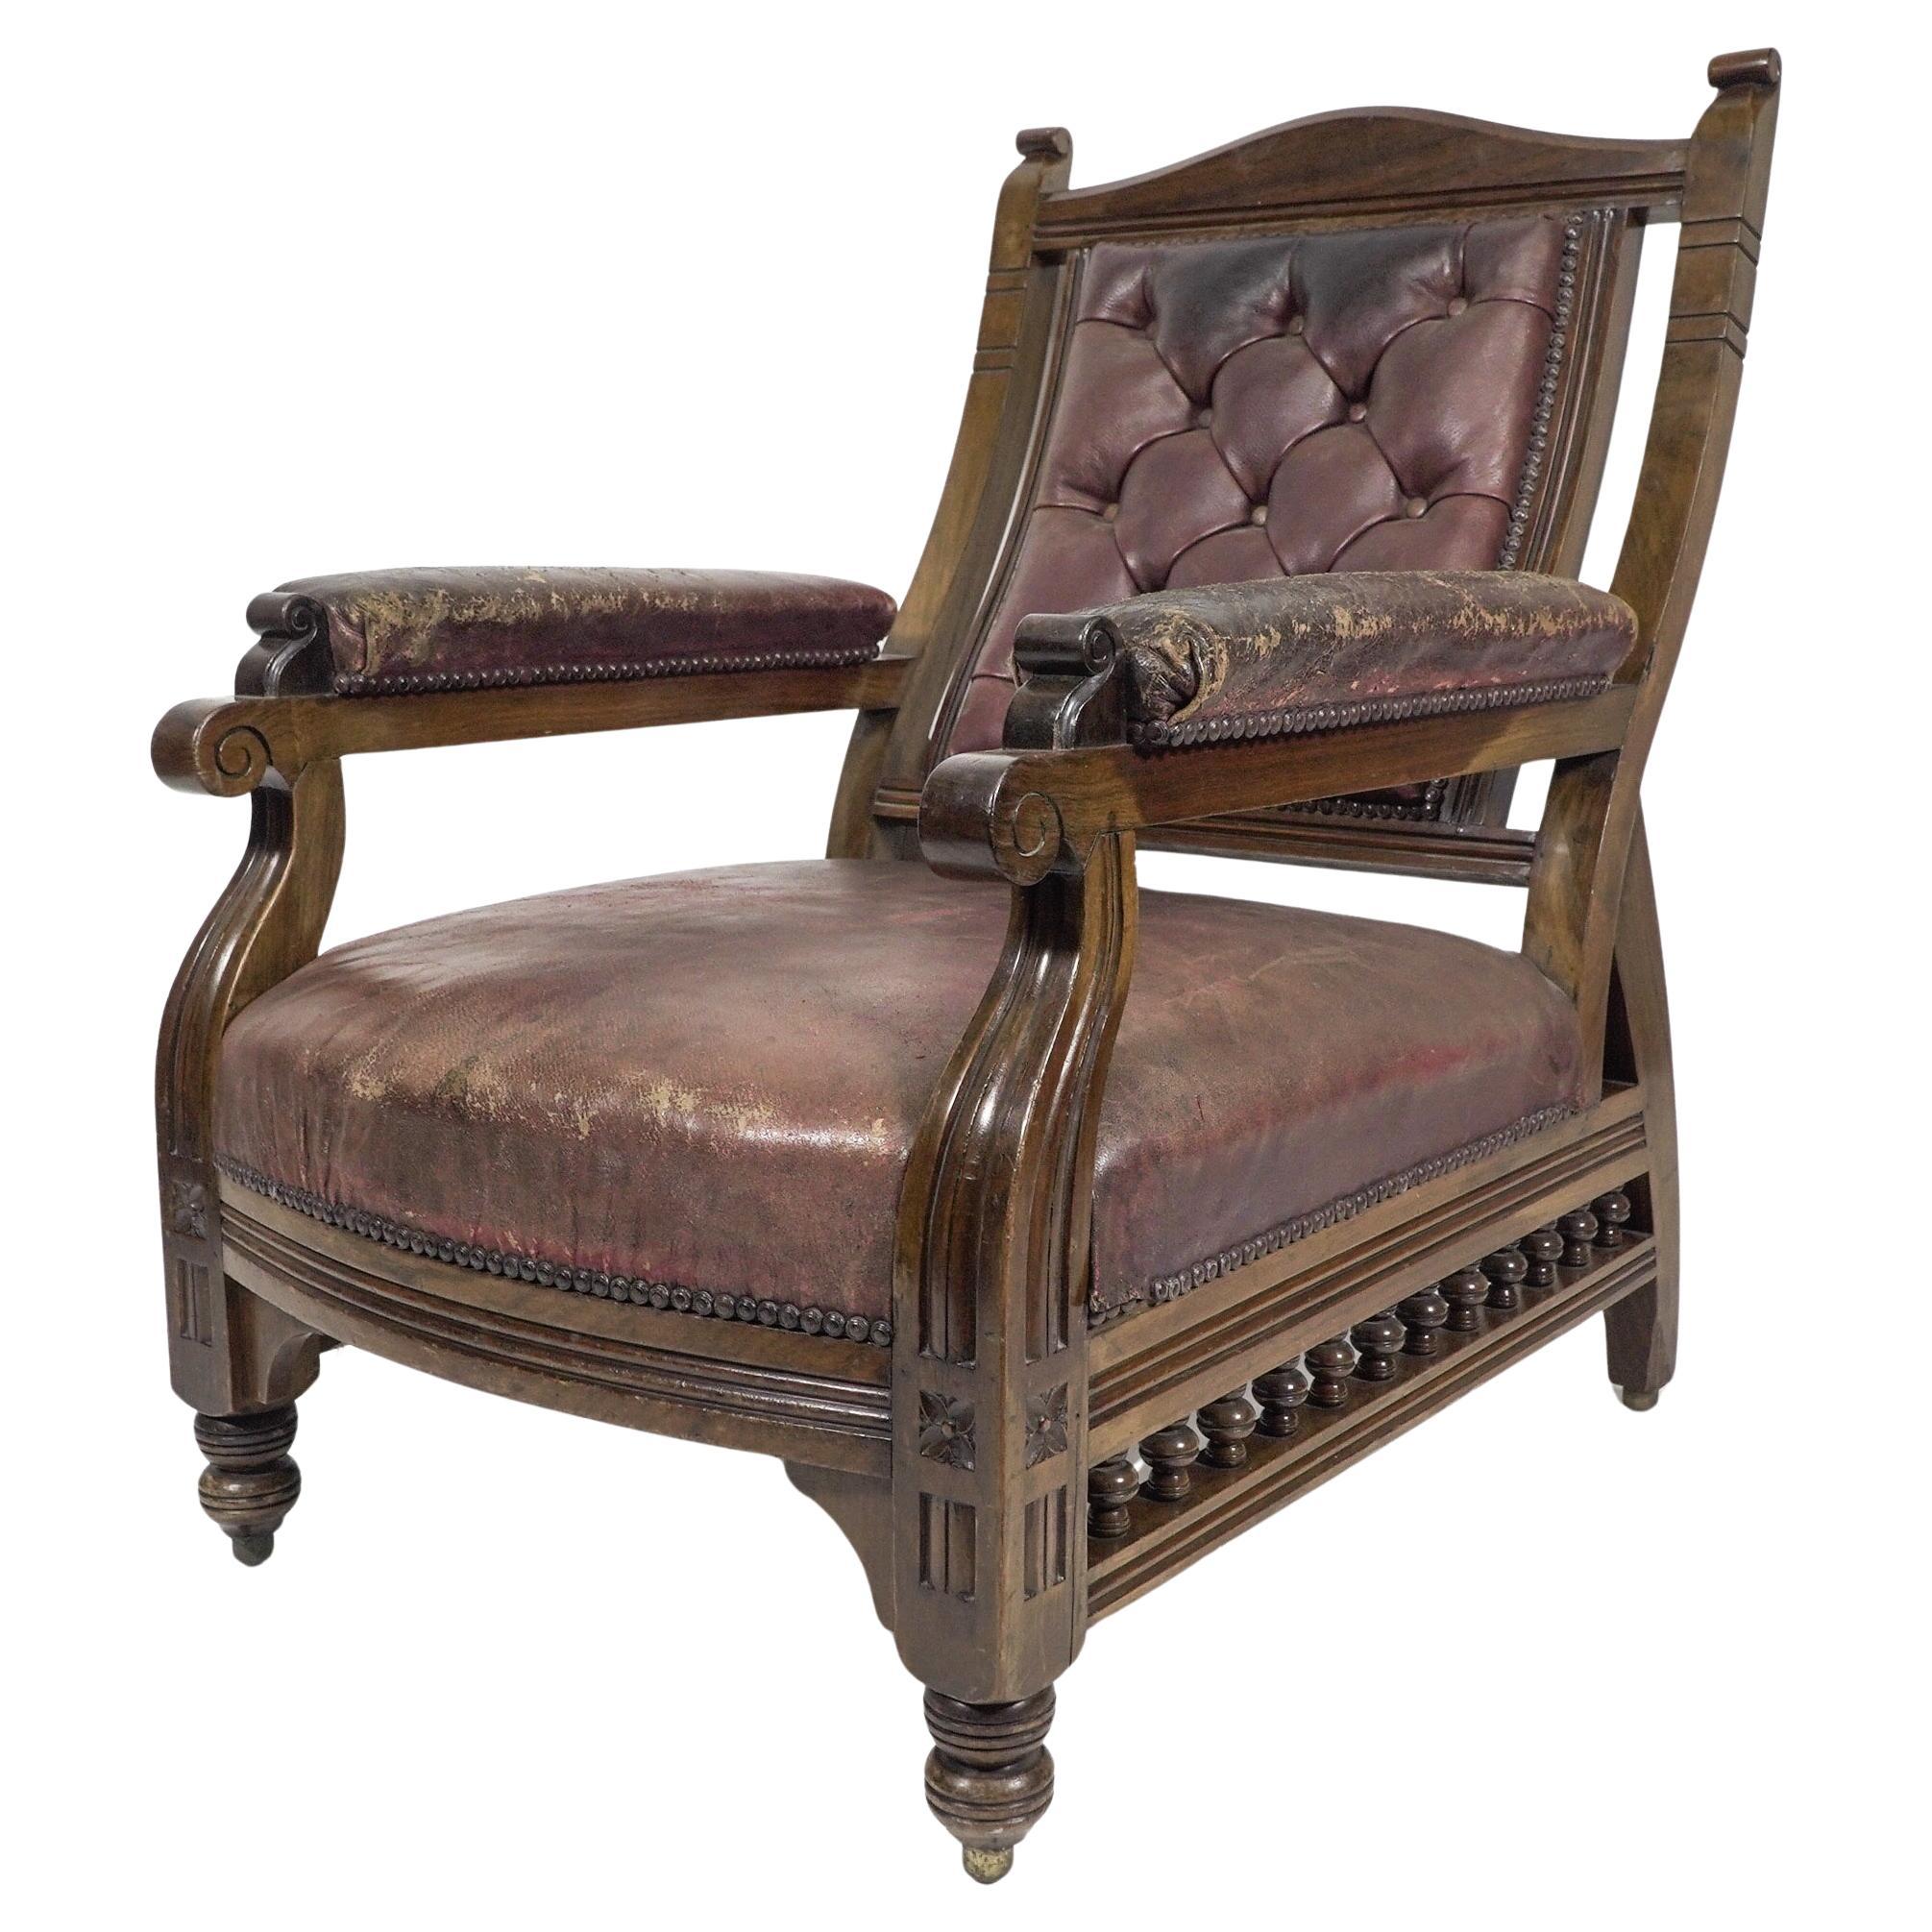 An Aesthetic Movement walnut armchair with a curvaceous back leather upholstery. For Sale